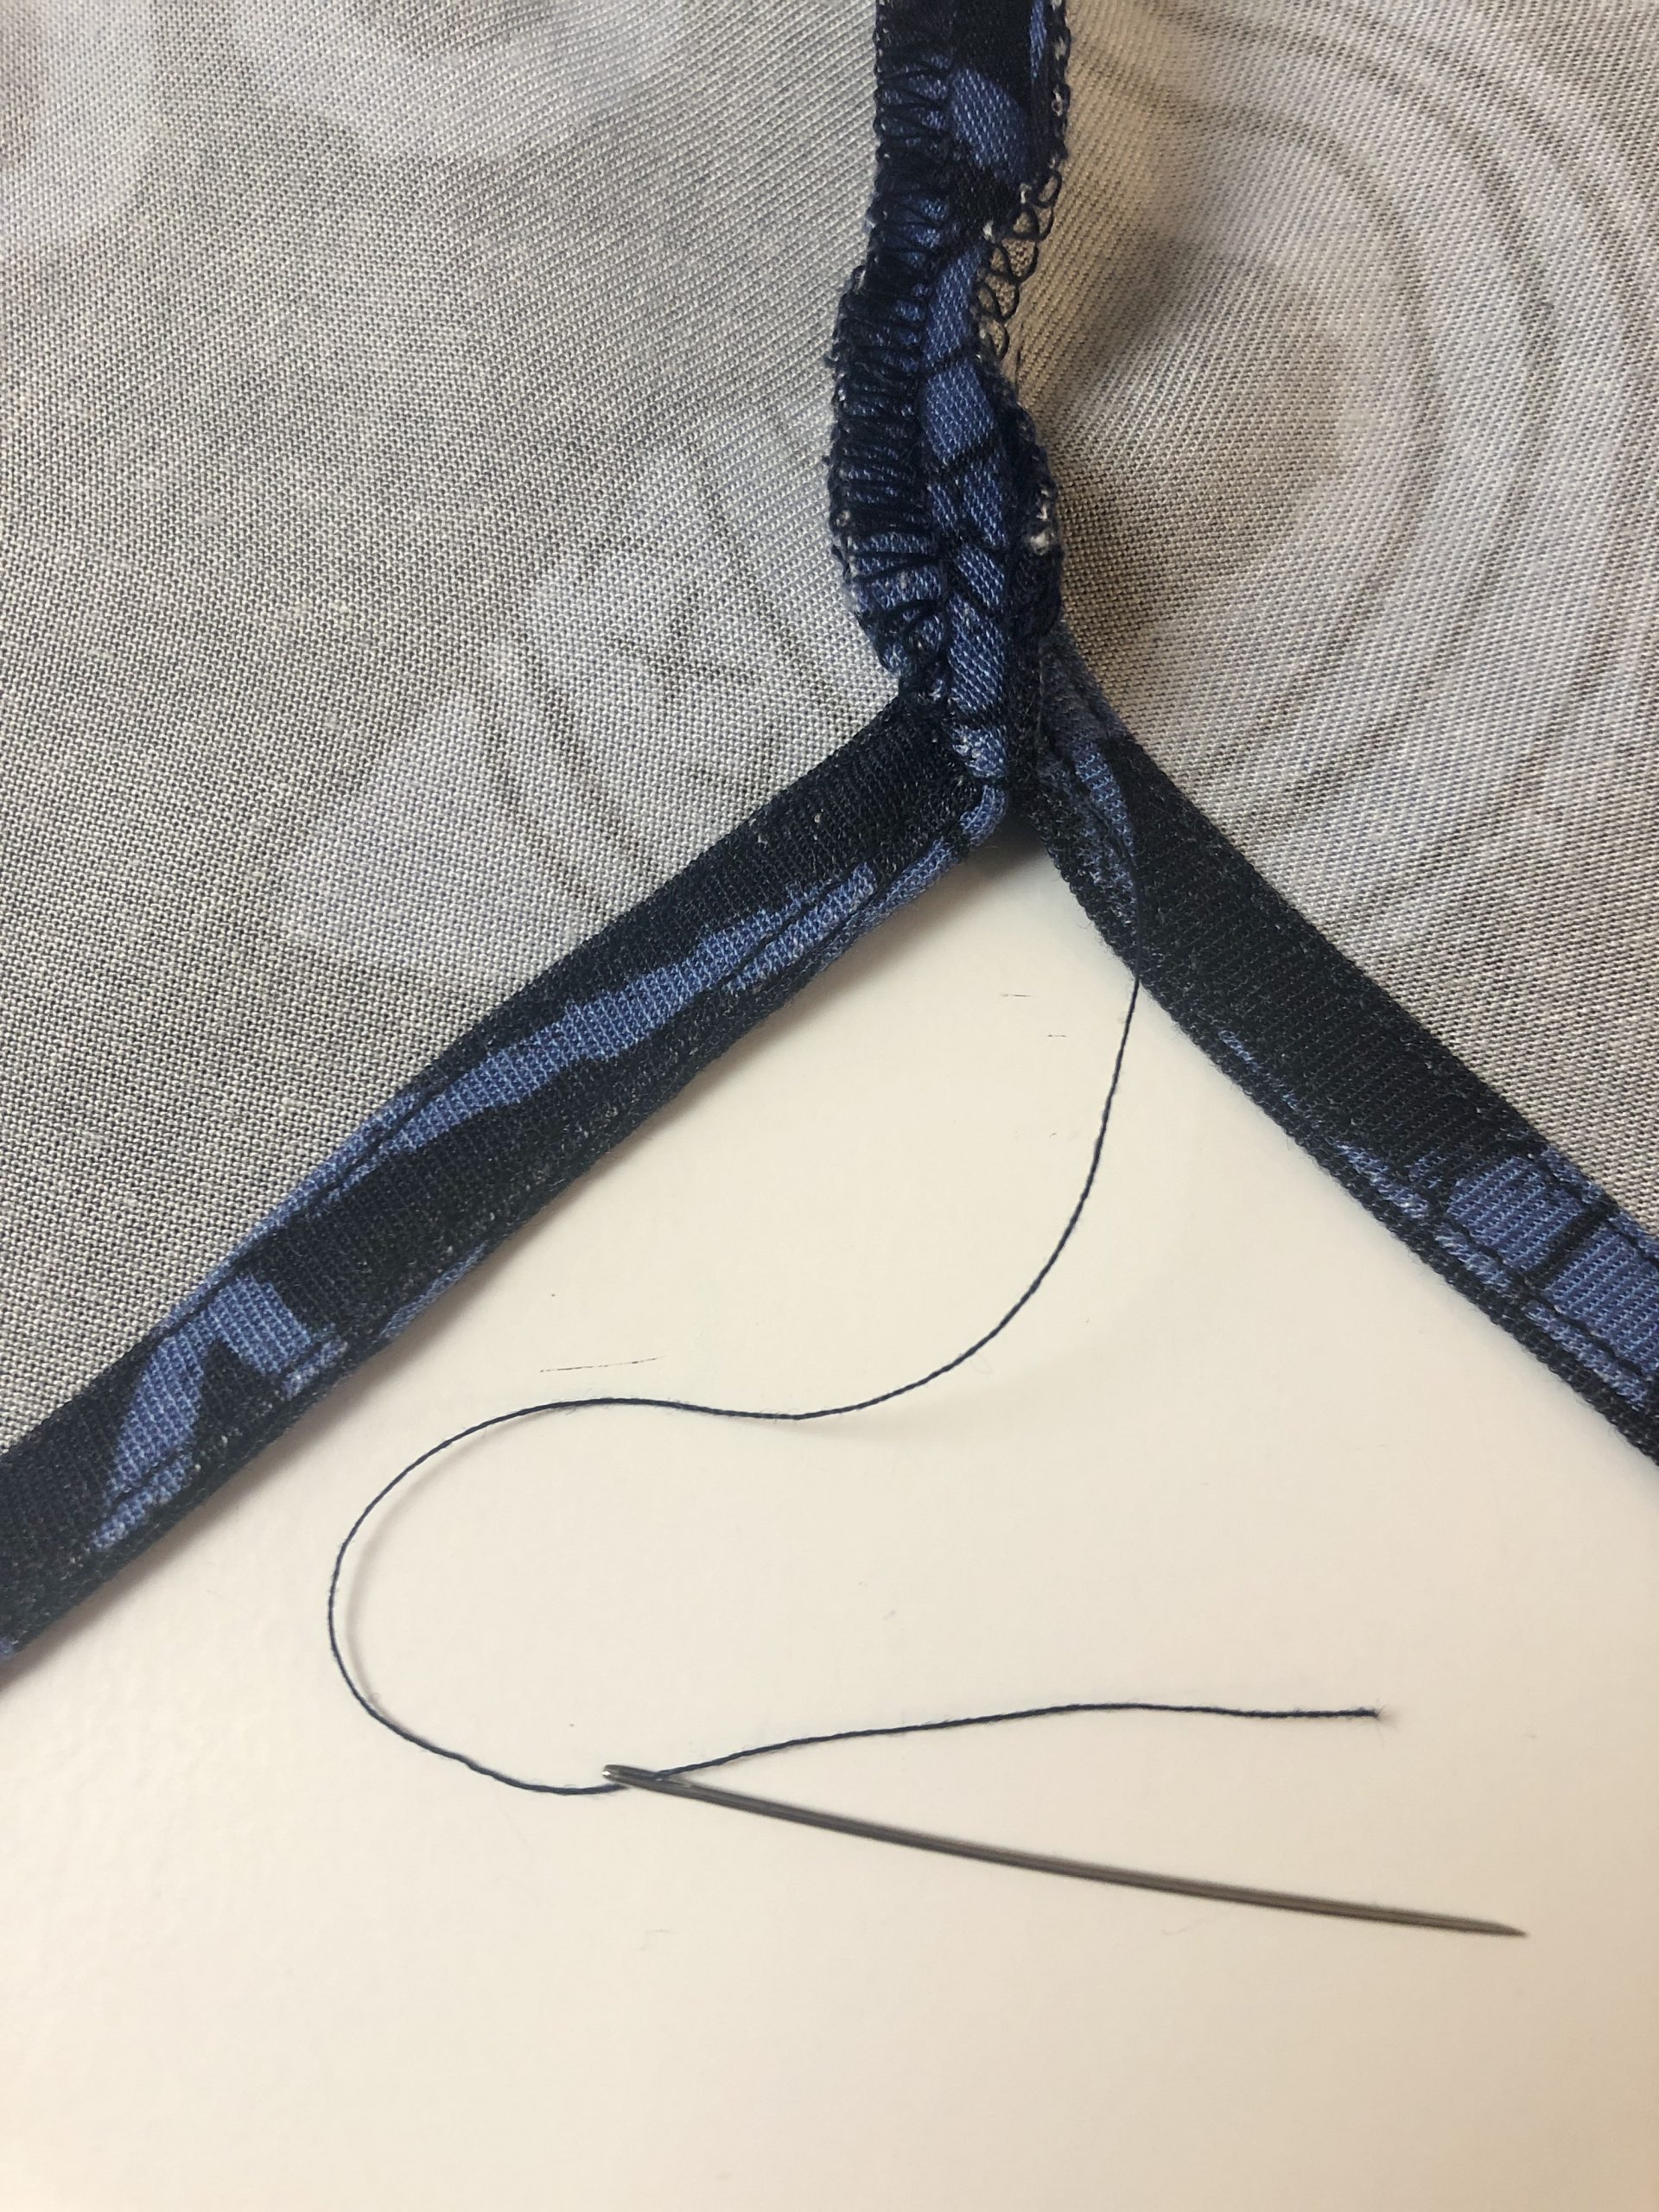 hand sewing needle, thread and inside of shirt